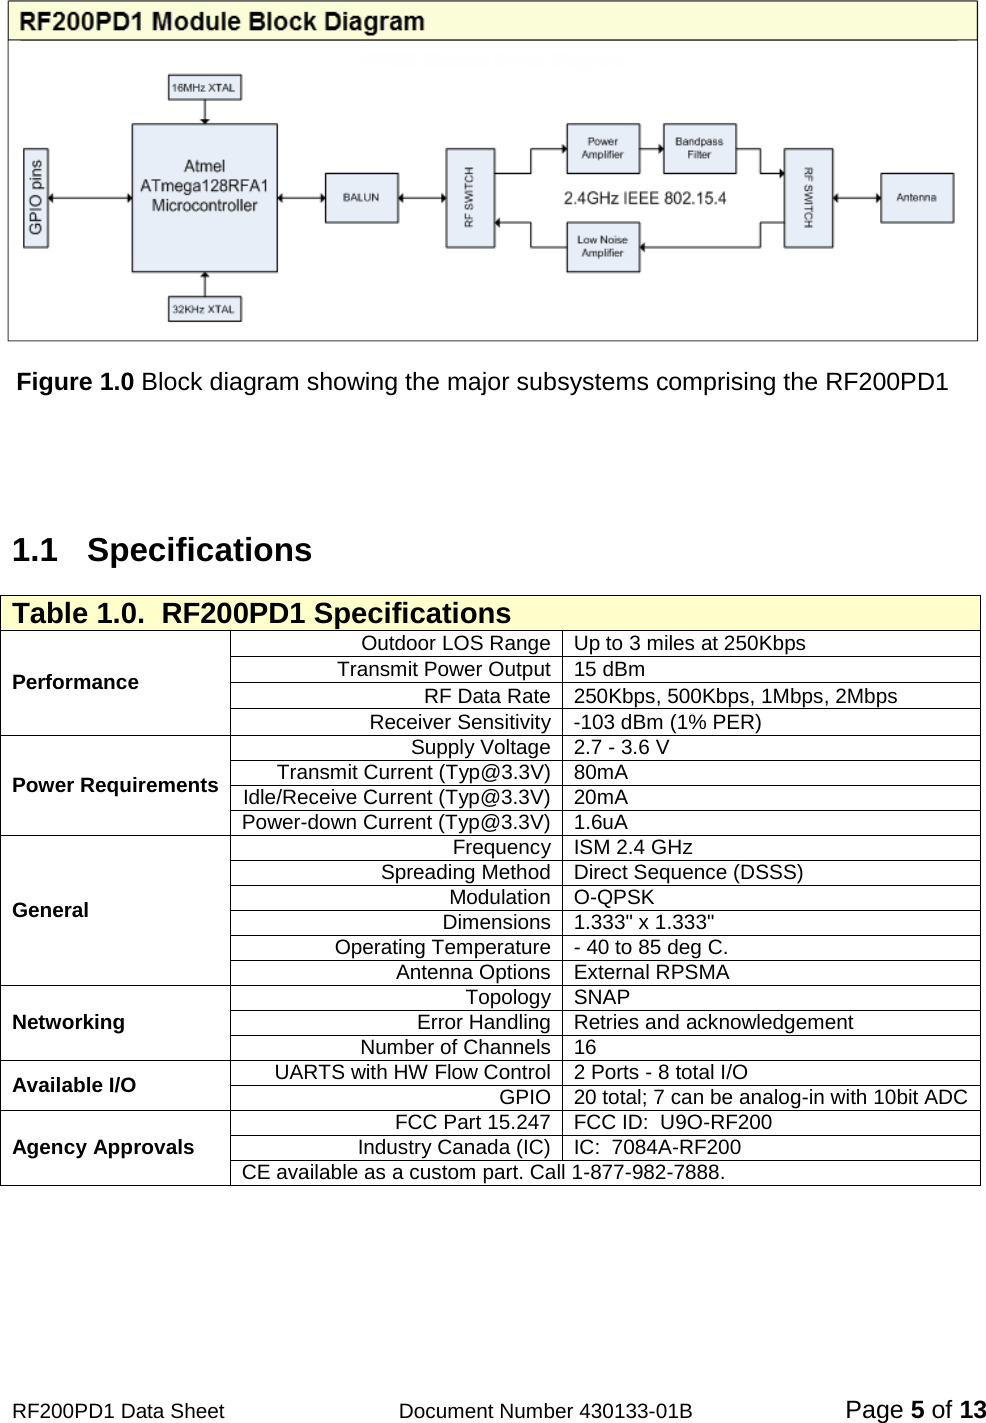                                            RF200PD1 Data Sheet                  Document Number 430133-01B  Page 5 of 13    Figure 1.0 Block diagram showing the major subsystems comprising the RF200PD1   1.1  Specifications Table 1.0.  RF200PD1 Specifications Performance Outdoor LOS Range Up to 3 miles at 250Kbps Transmit Power Output 15 dBm RF Data Rate 250Kbps, 500Kbps, 1Mbps, 2Mbps Receiver Sensitivity  -103 dBm (1% PER) Power Requirements Supply Voltage 2.7 - 3.6 V Transmit Current (Typ@3.3V) 80mA Idle/Receive Current (Typ@3.3V) 20mA Power-down Current (Typ@3.3V) 1.6uA General Frequency ISM 2.4 GHz Spreading Method Direct Sequence (DSSS) Modulation O-QPSK Dimensions 1.333&quot; x 1.333&quot; Operating Temperature - 40 to 85 deg C. Antenna Options External RPSMA Networking Topology SNAP Error Handling Retries and acknowledgement Number of Channels 16 Available I/O UARTS with HW Flow Control 2 Ports - 8 total I/O GPIO 20 total; 7 can be analog-in with 10bit ADC Agency Approvals FCC Part 15.247 FCC ID:  U9O-RF200 Industry Canada (IC) IC:  7084A-RF200 CE available as a custom part. Call 1-877-982-7888.  